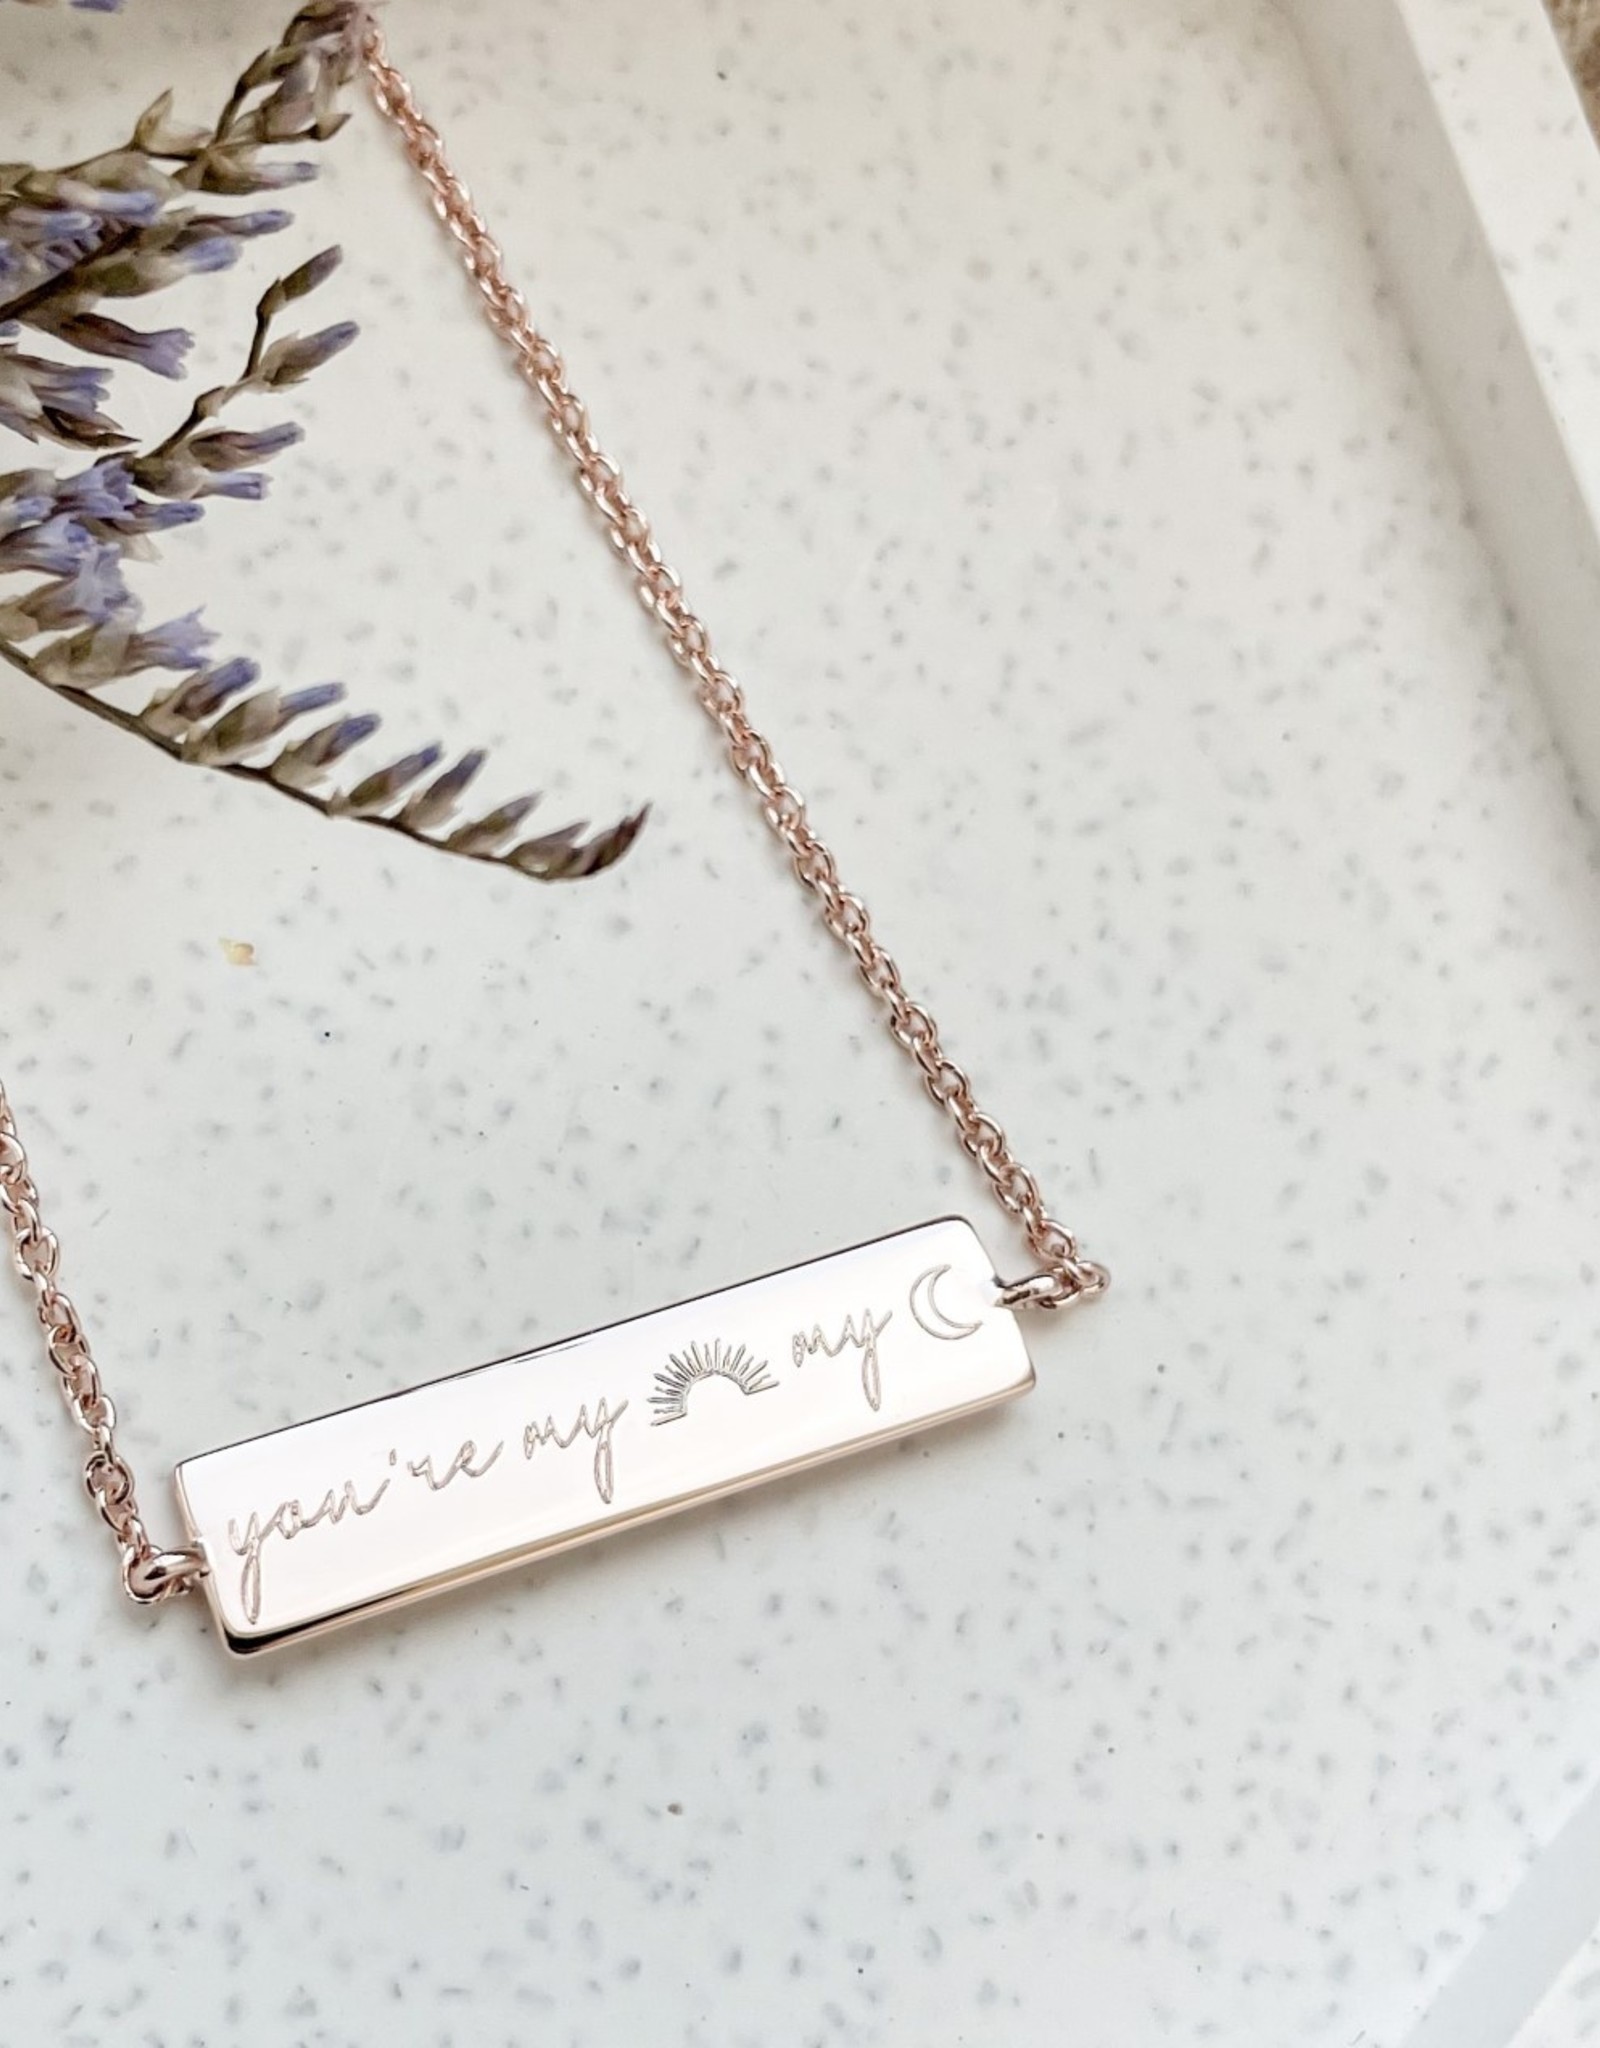 Necklace with engraved charm - from 80 euro